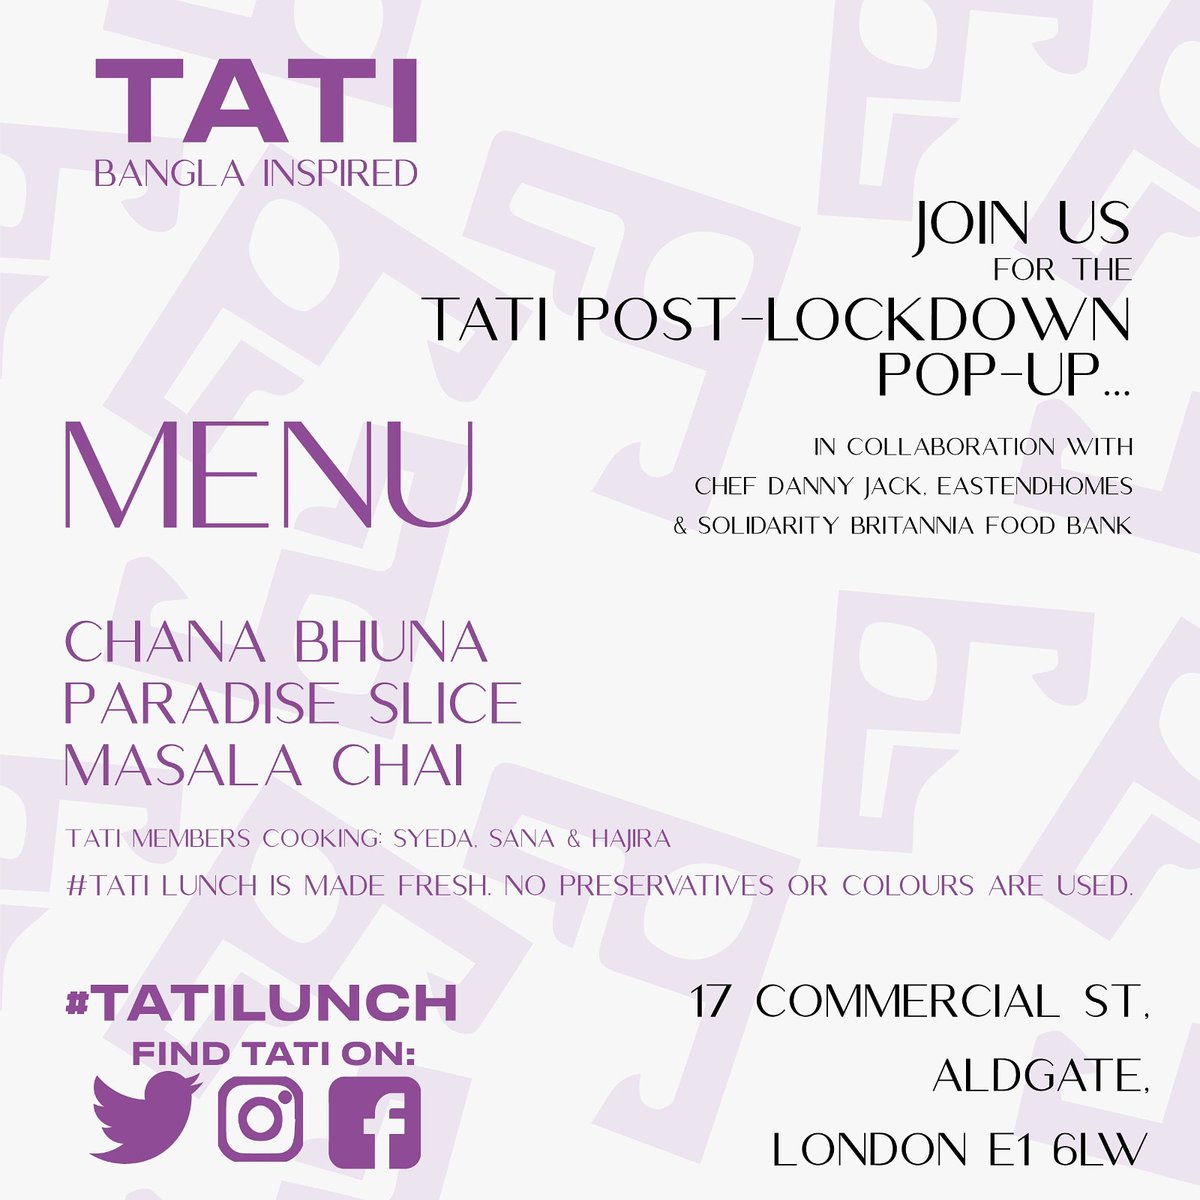 TATI Pop Up today. Join us for Masala Chai, slice of Paradise Cake and Chana Bhuna with salad. Done in collaboration with #Eastendhomes , @chefdannyjack and #SolidarityBritain. #toynbeestudio @ToynbeeHall @TheCanvasCafeE1 @KahailaCafe @aldgateinwinter @AldgateBID